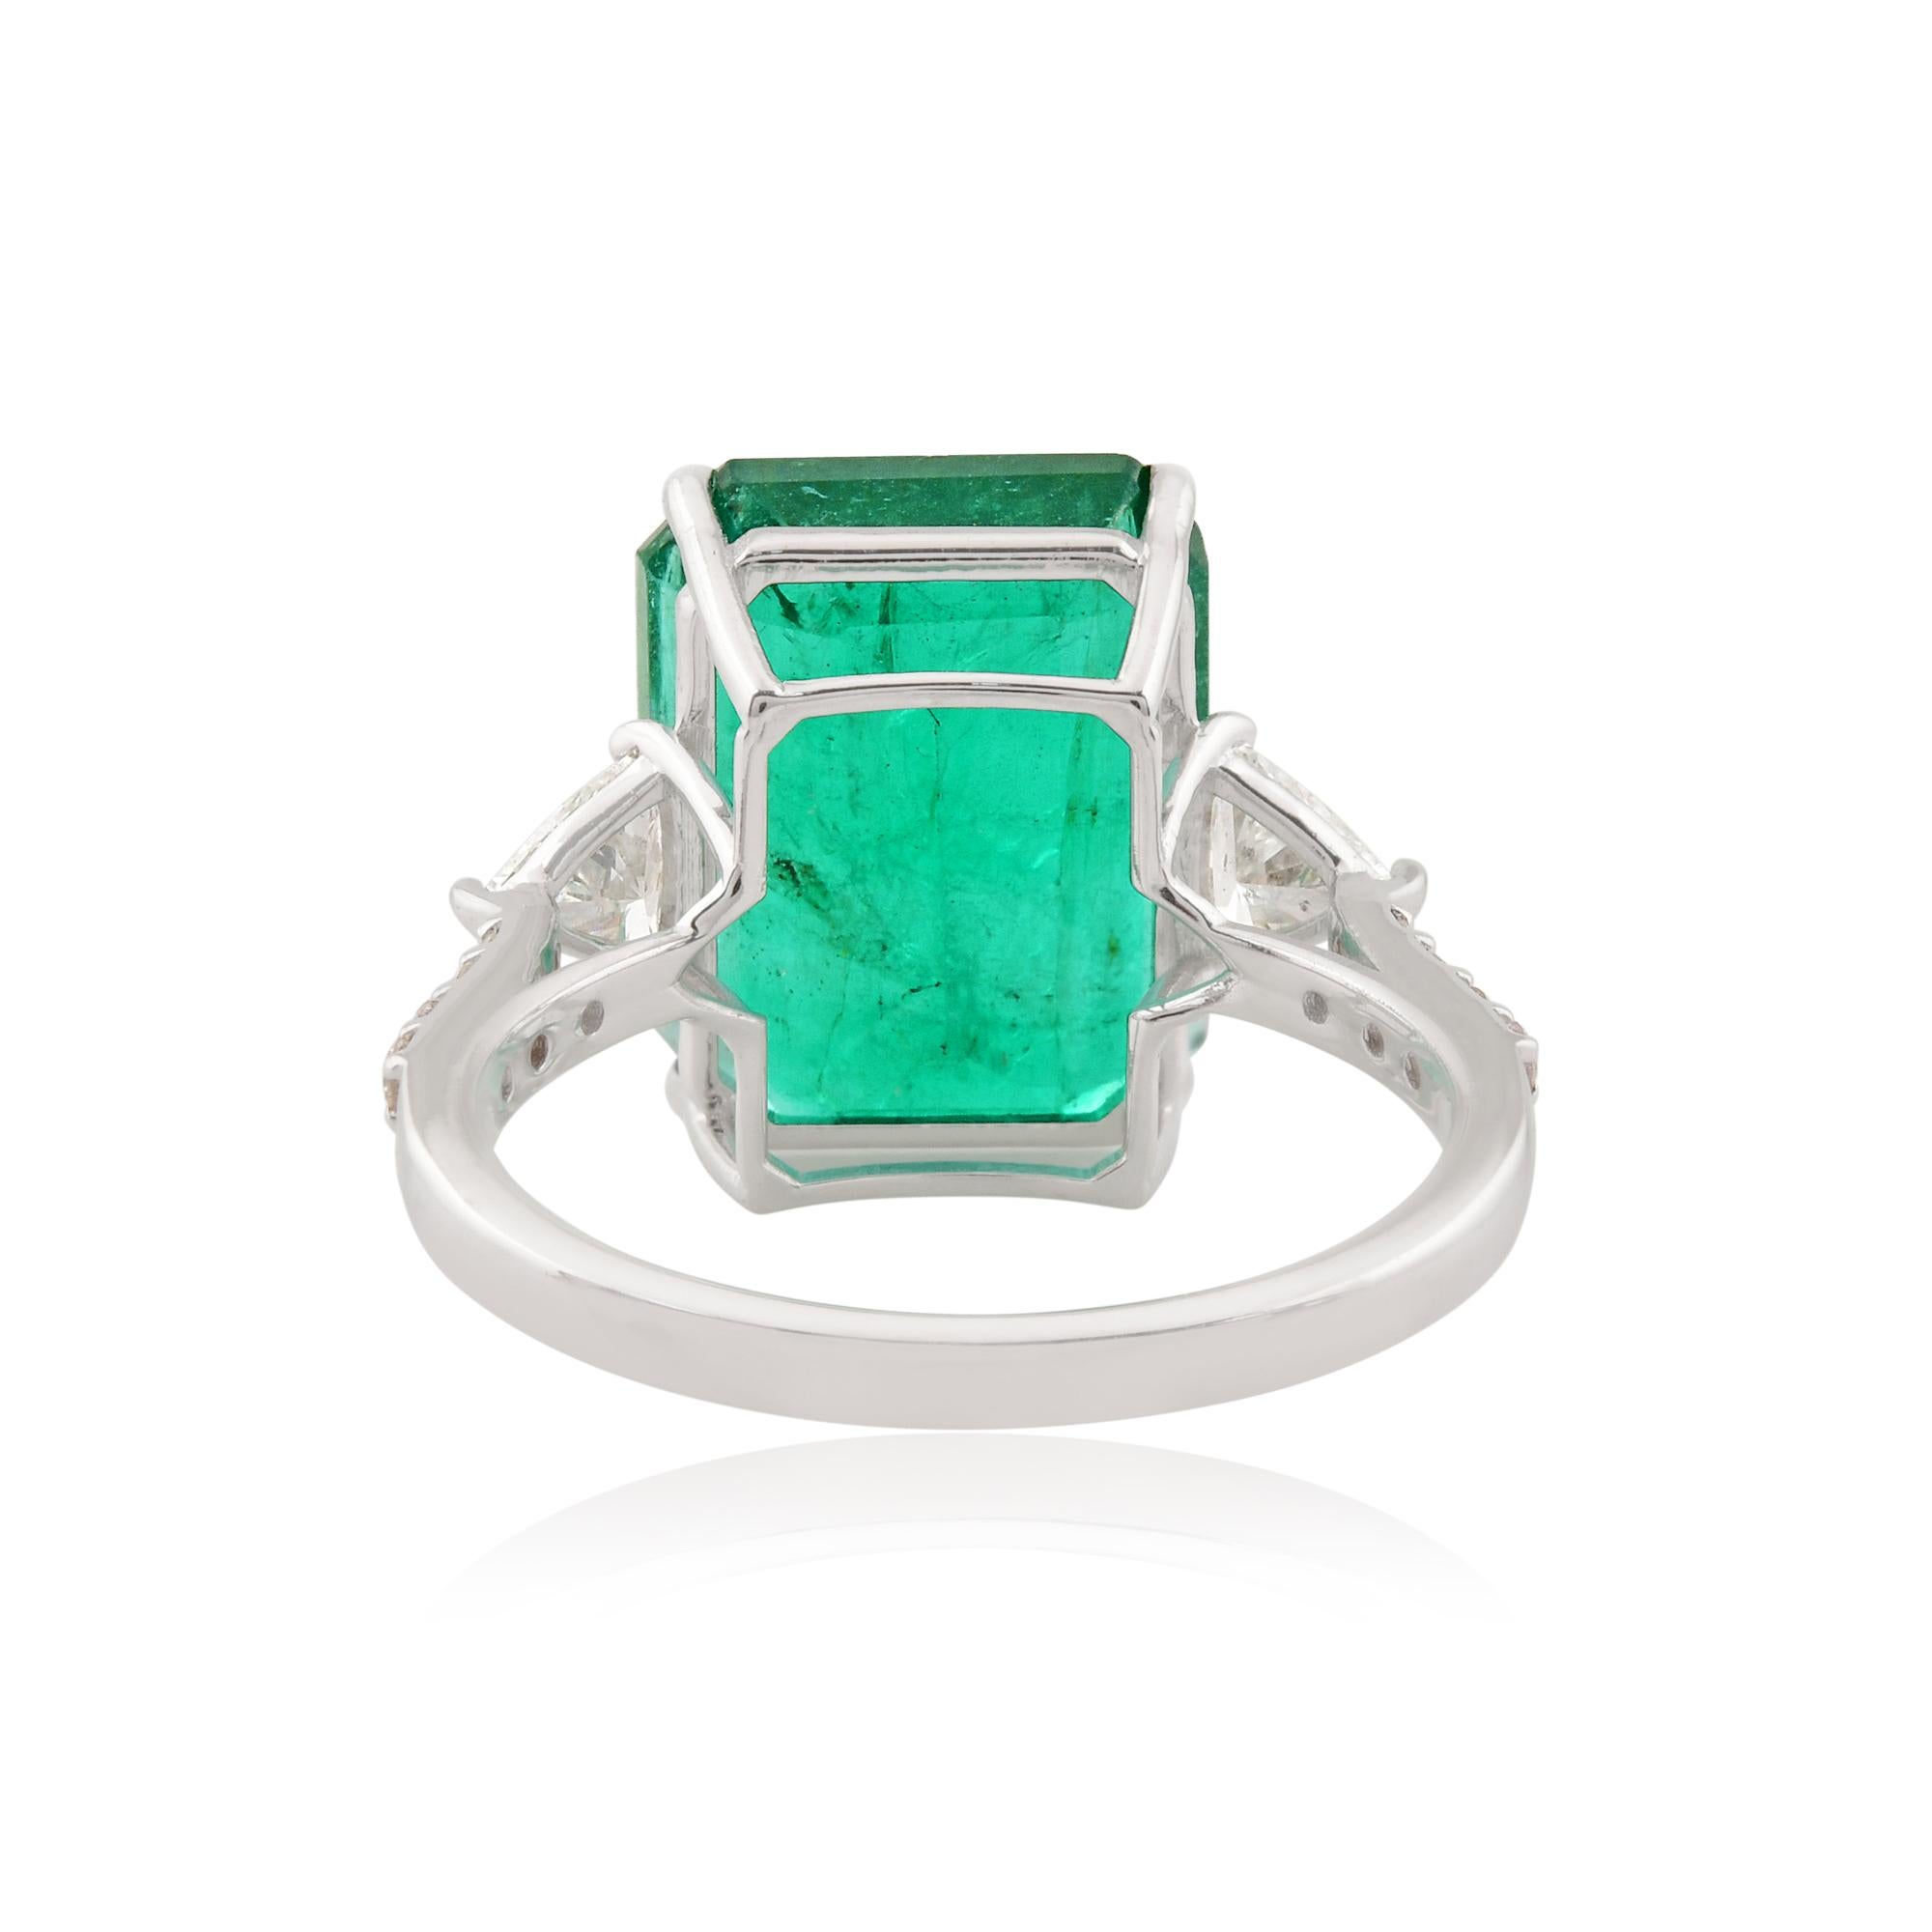 For Sale:  Natural Emerald Gemstone Ring Trillion Cut Diamond Solid 18k White Gold Jewelry 4